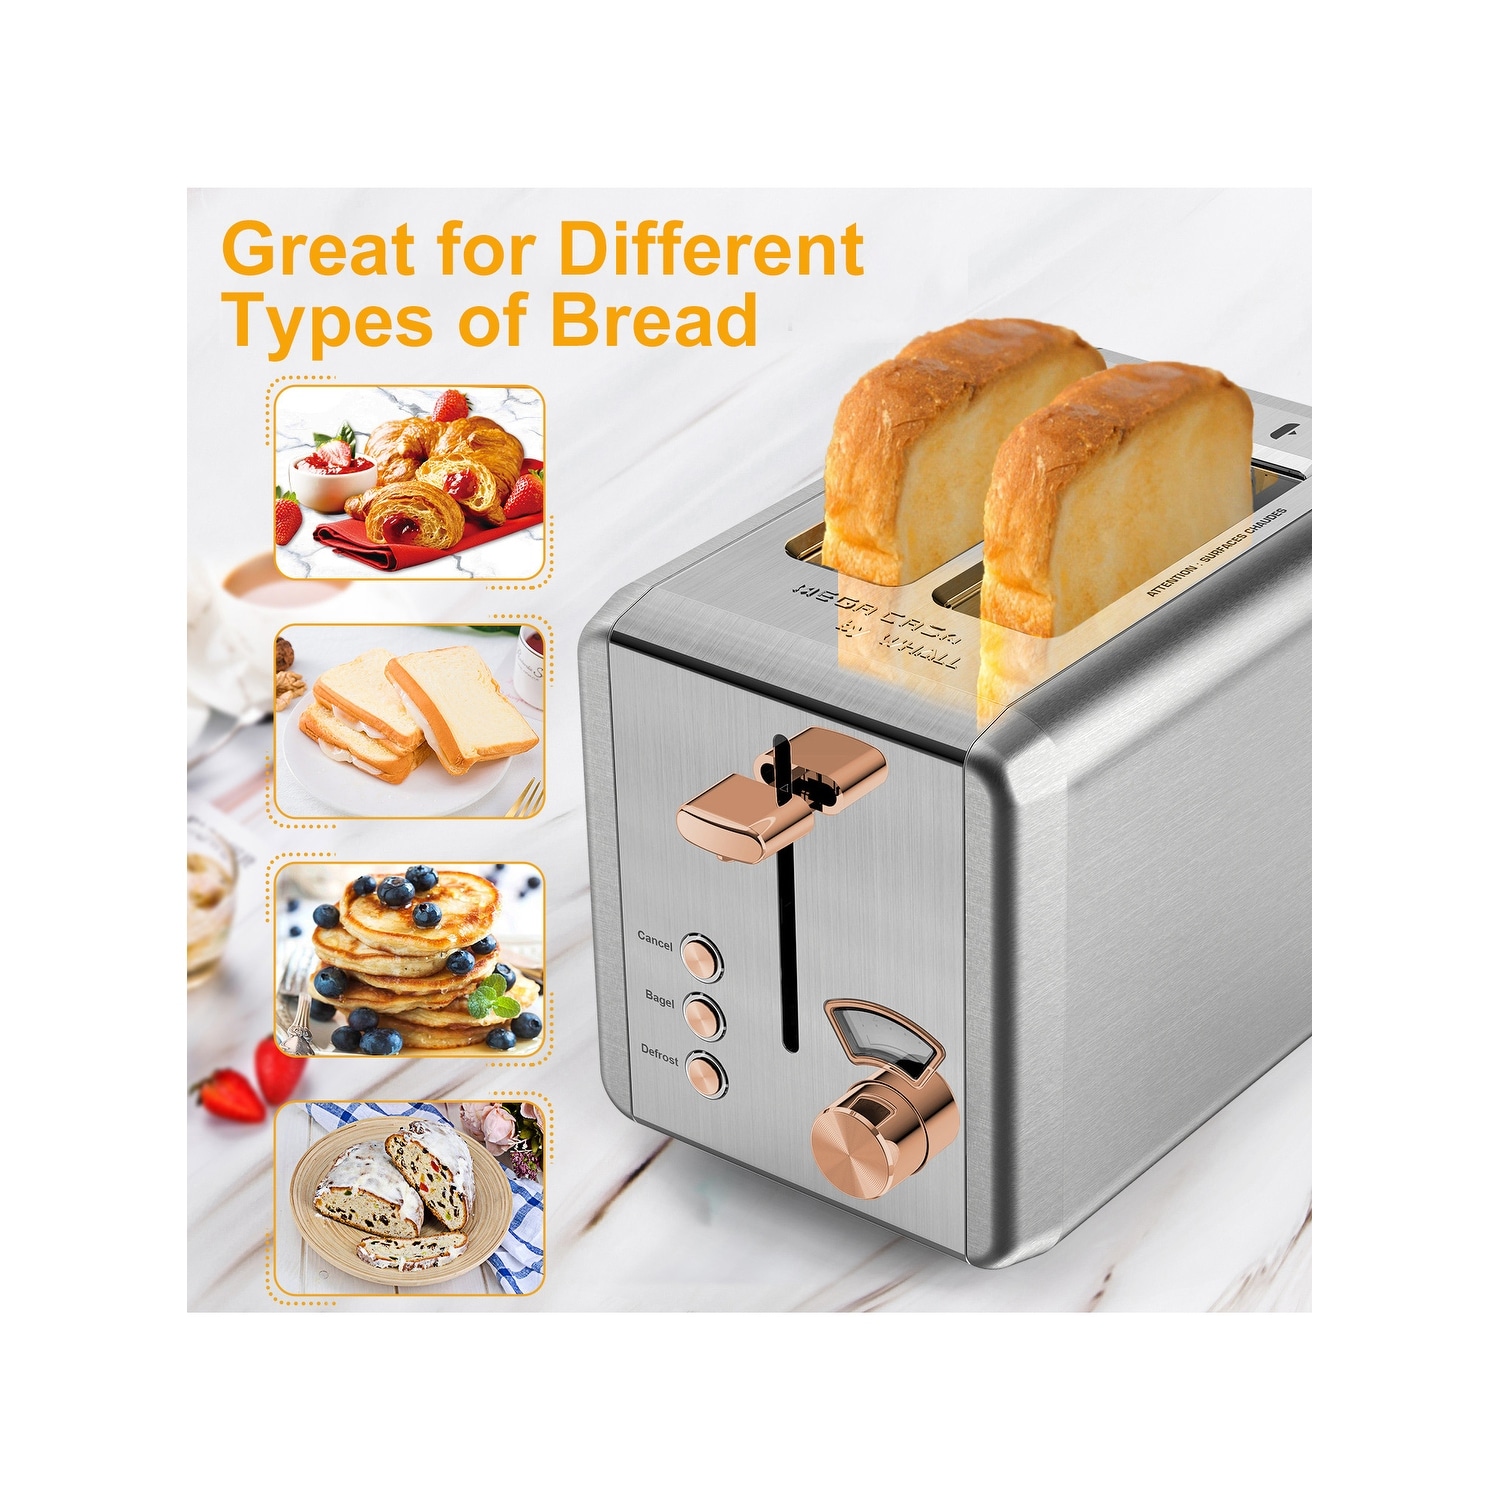 https://ak1.ostkcdn.com/images/products/is/images/direct/7ef40a4508f2705114bee10d7ae31c48d0210c20/Whall-2-Slice-850W-Stainless-Steel-Toaster.jpg